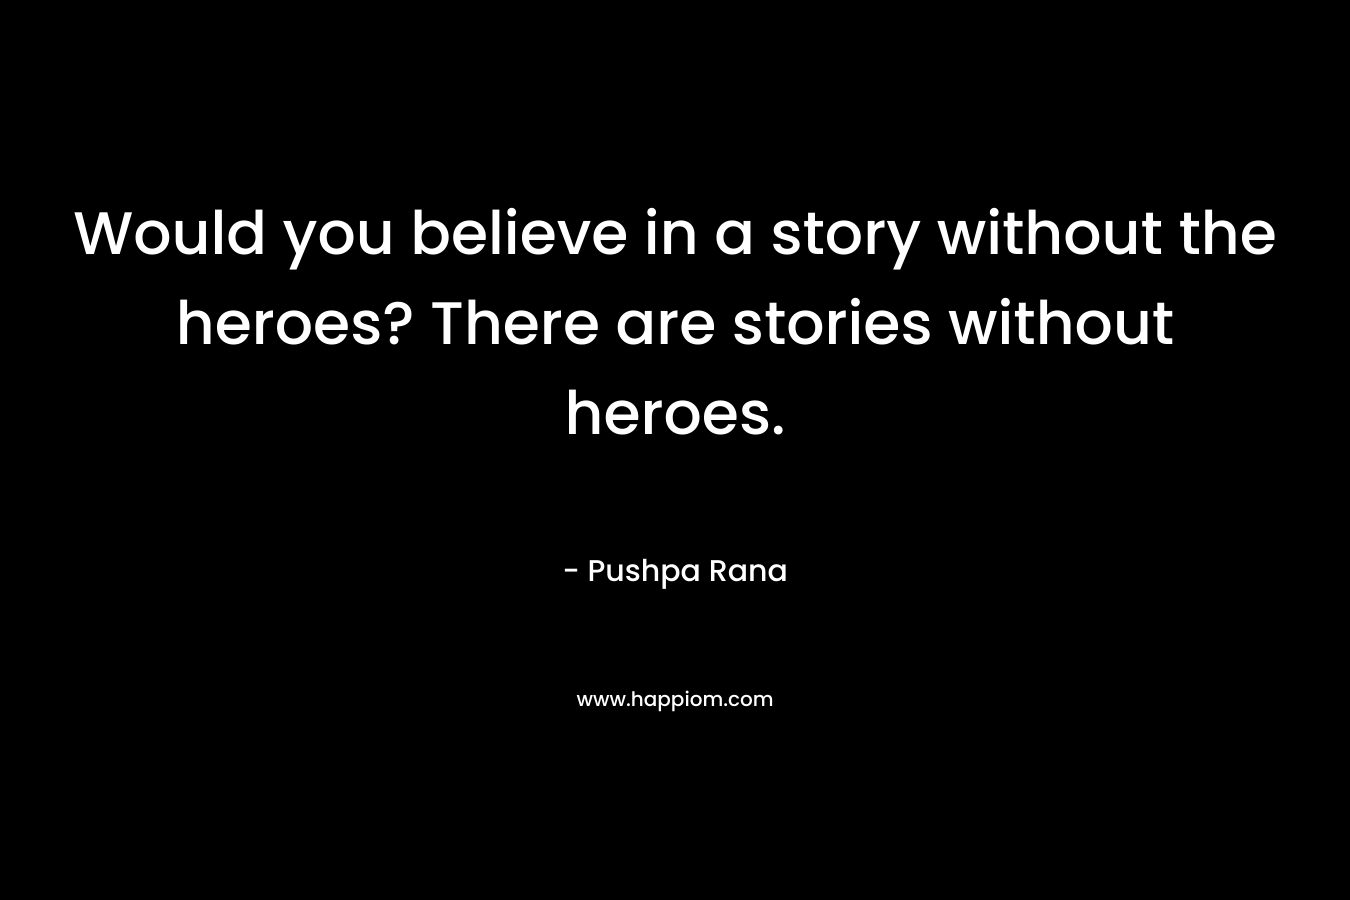 Would you believe in a story without the heroes? There are stories without heroes. – Pushpa Rana